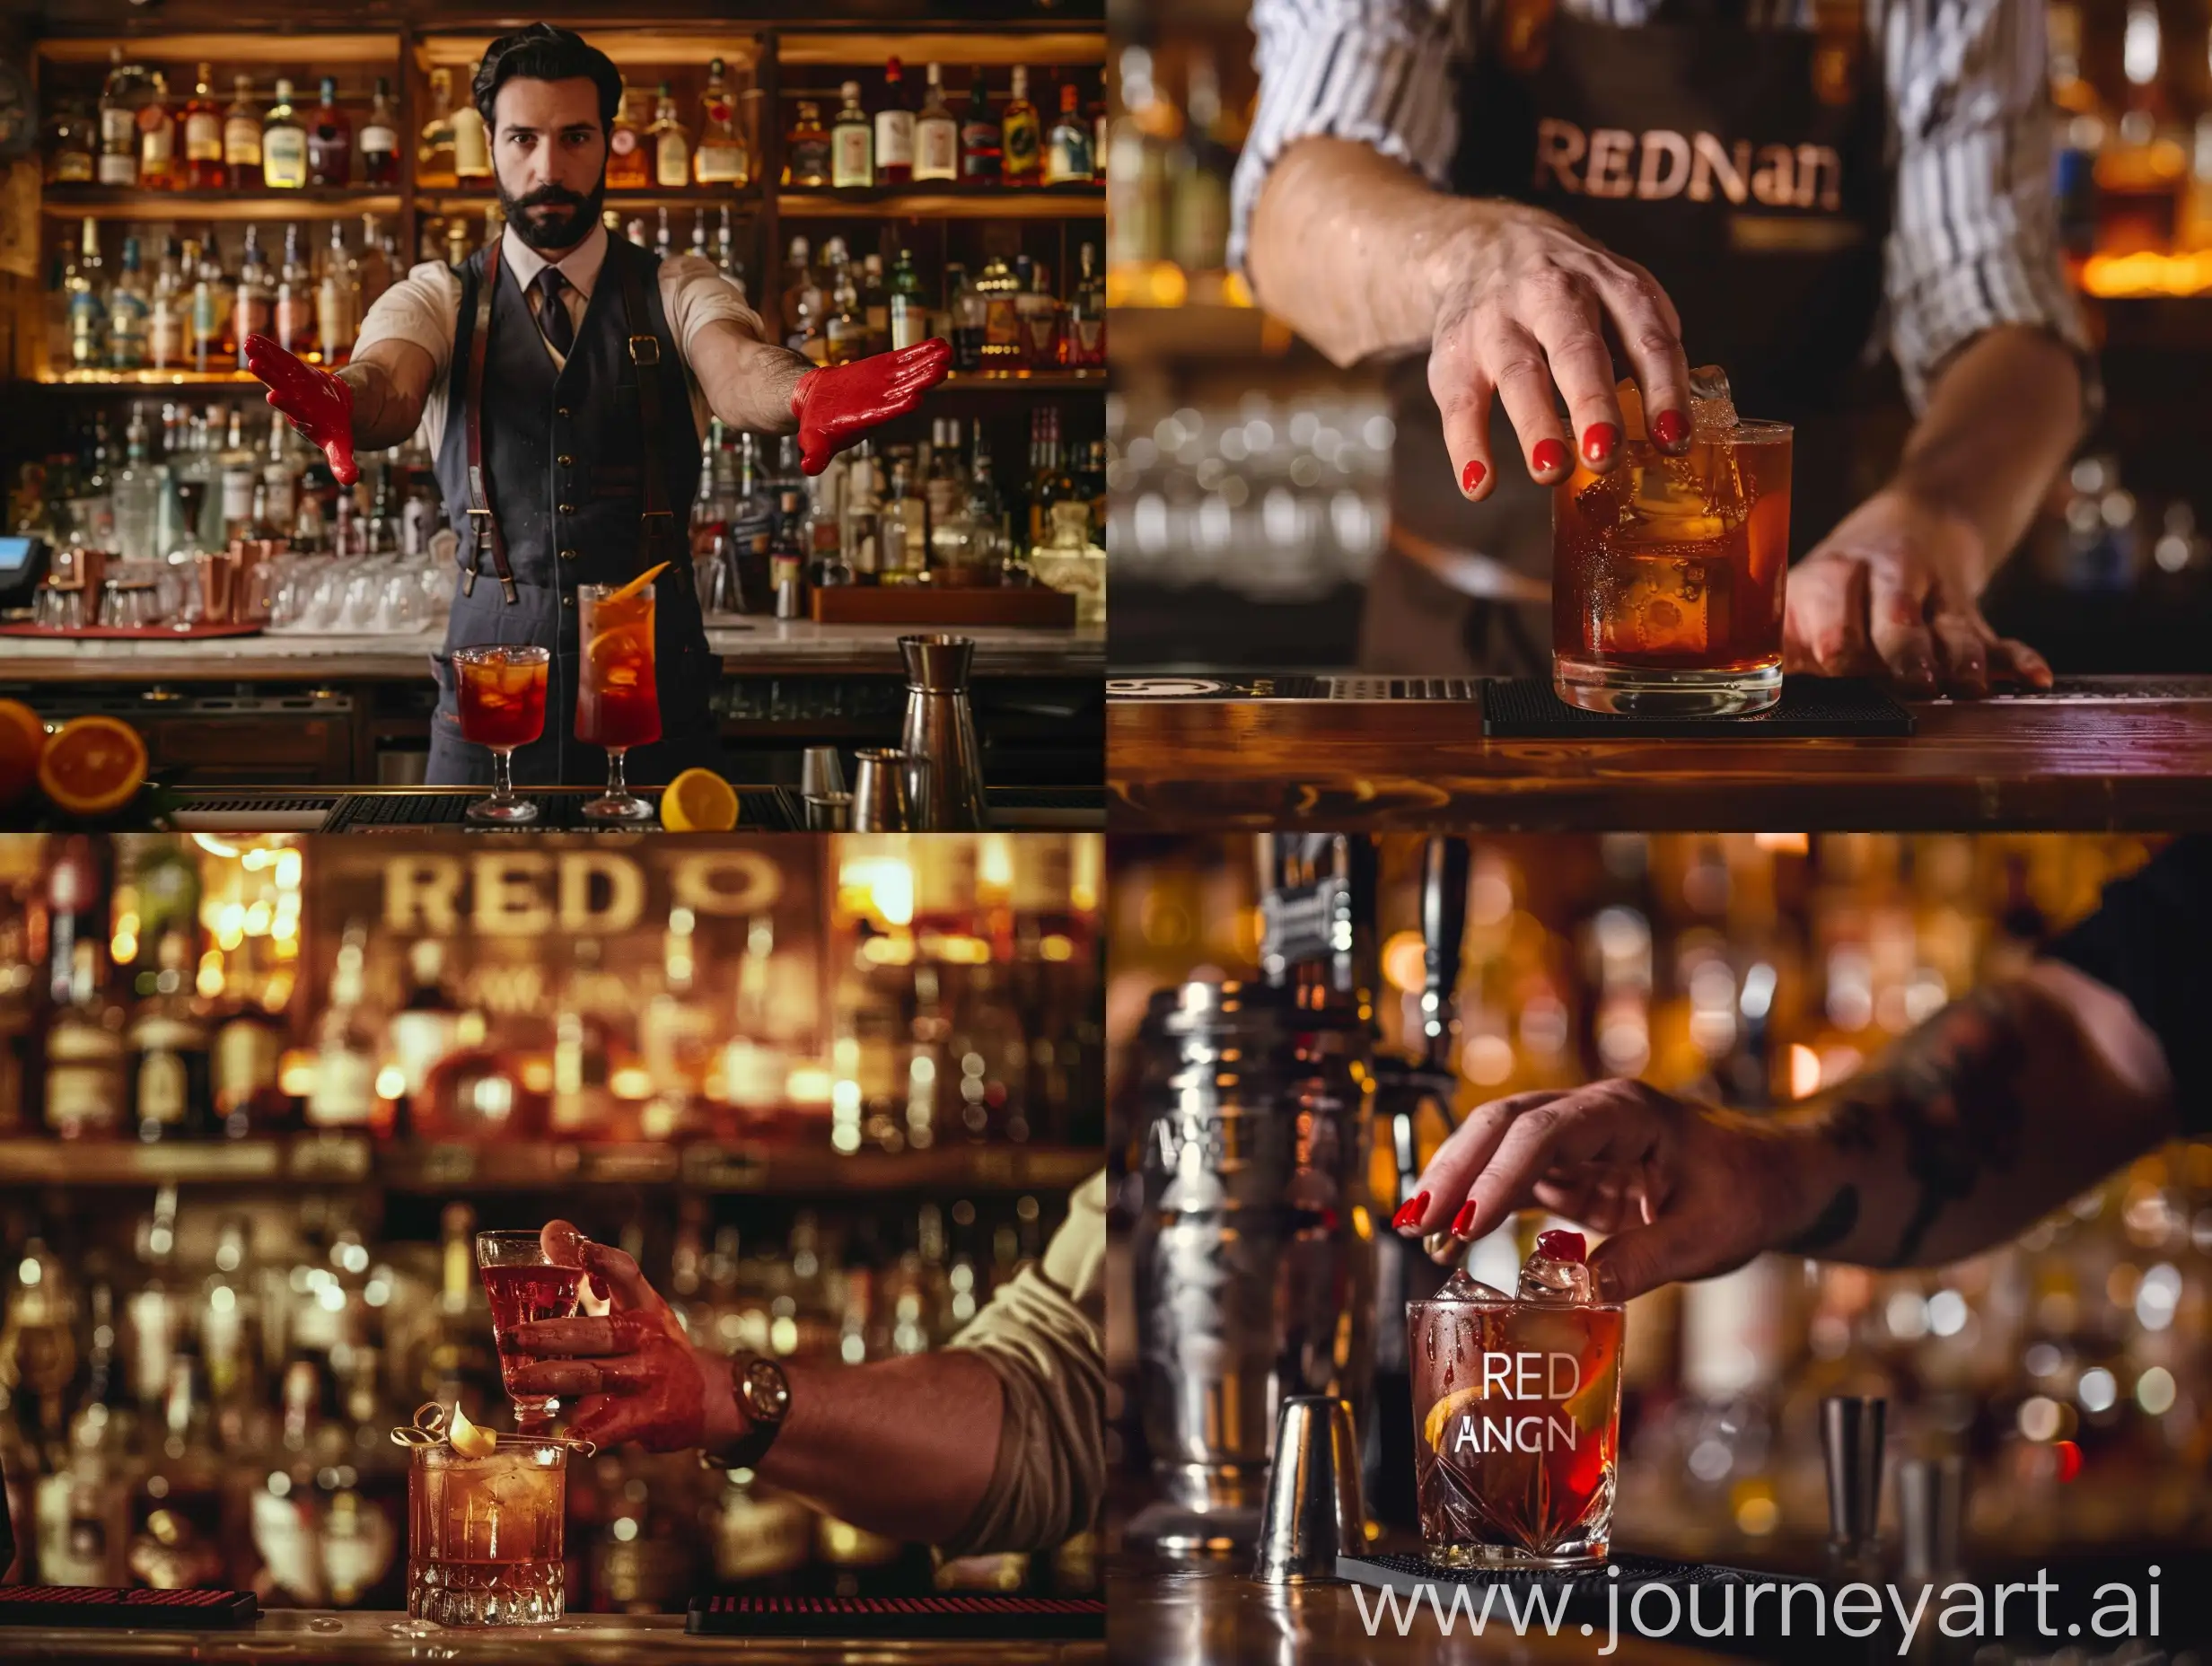 create a film poster of can movie called 'Red Hands' featuring a barman that makes the world's best negronis